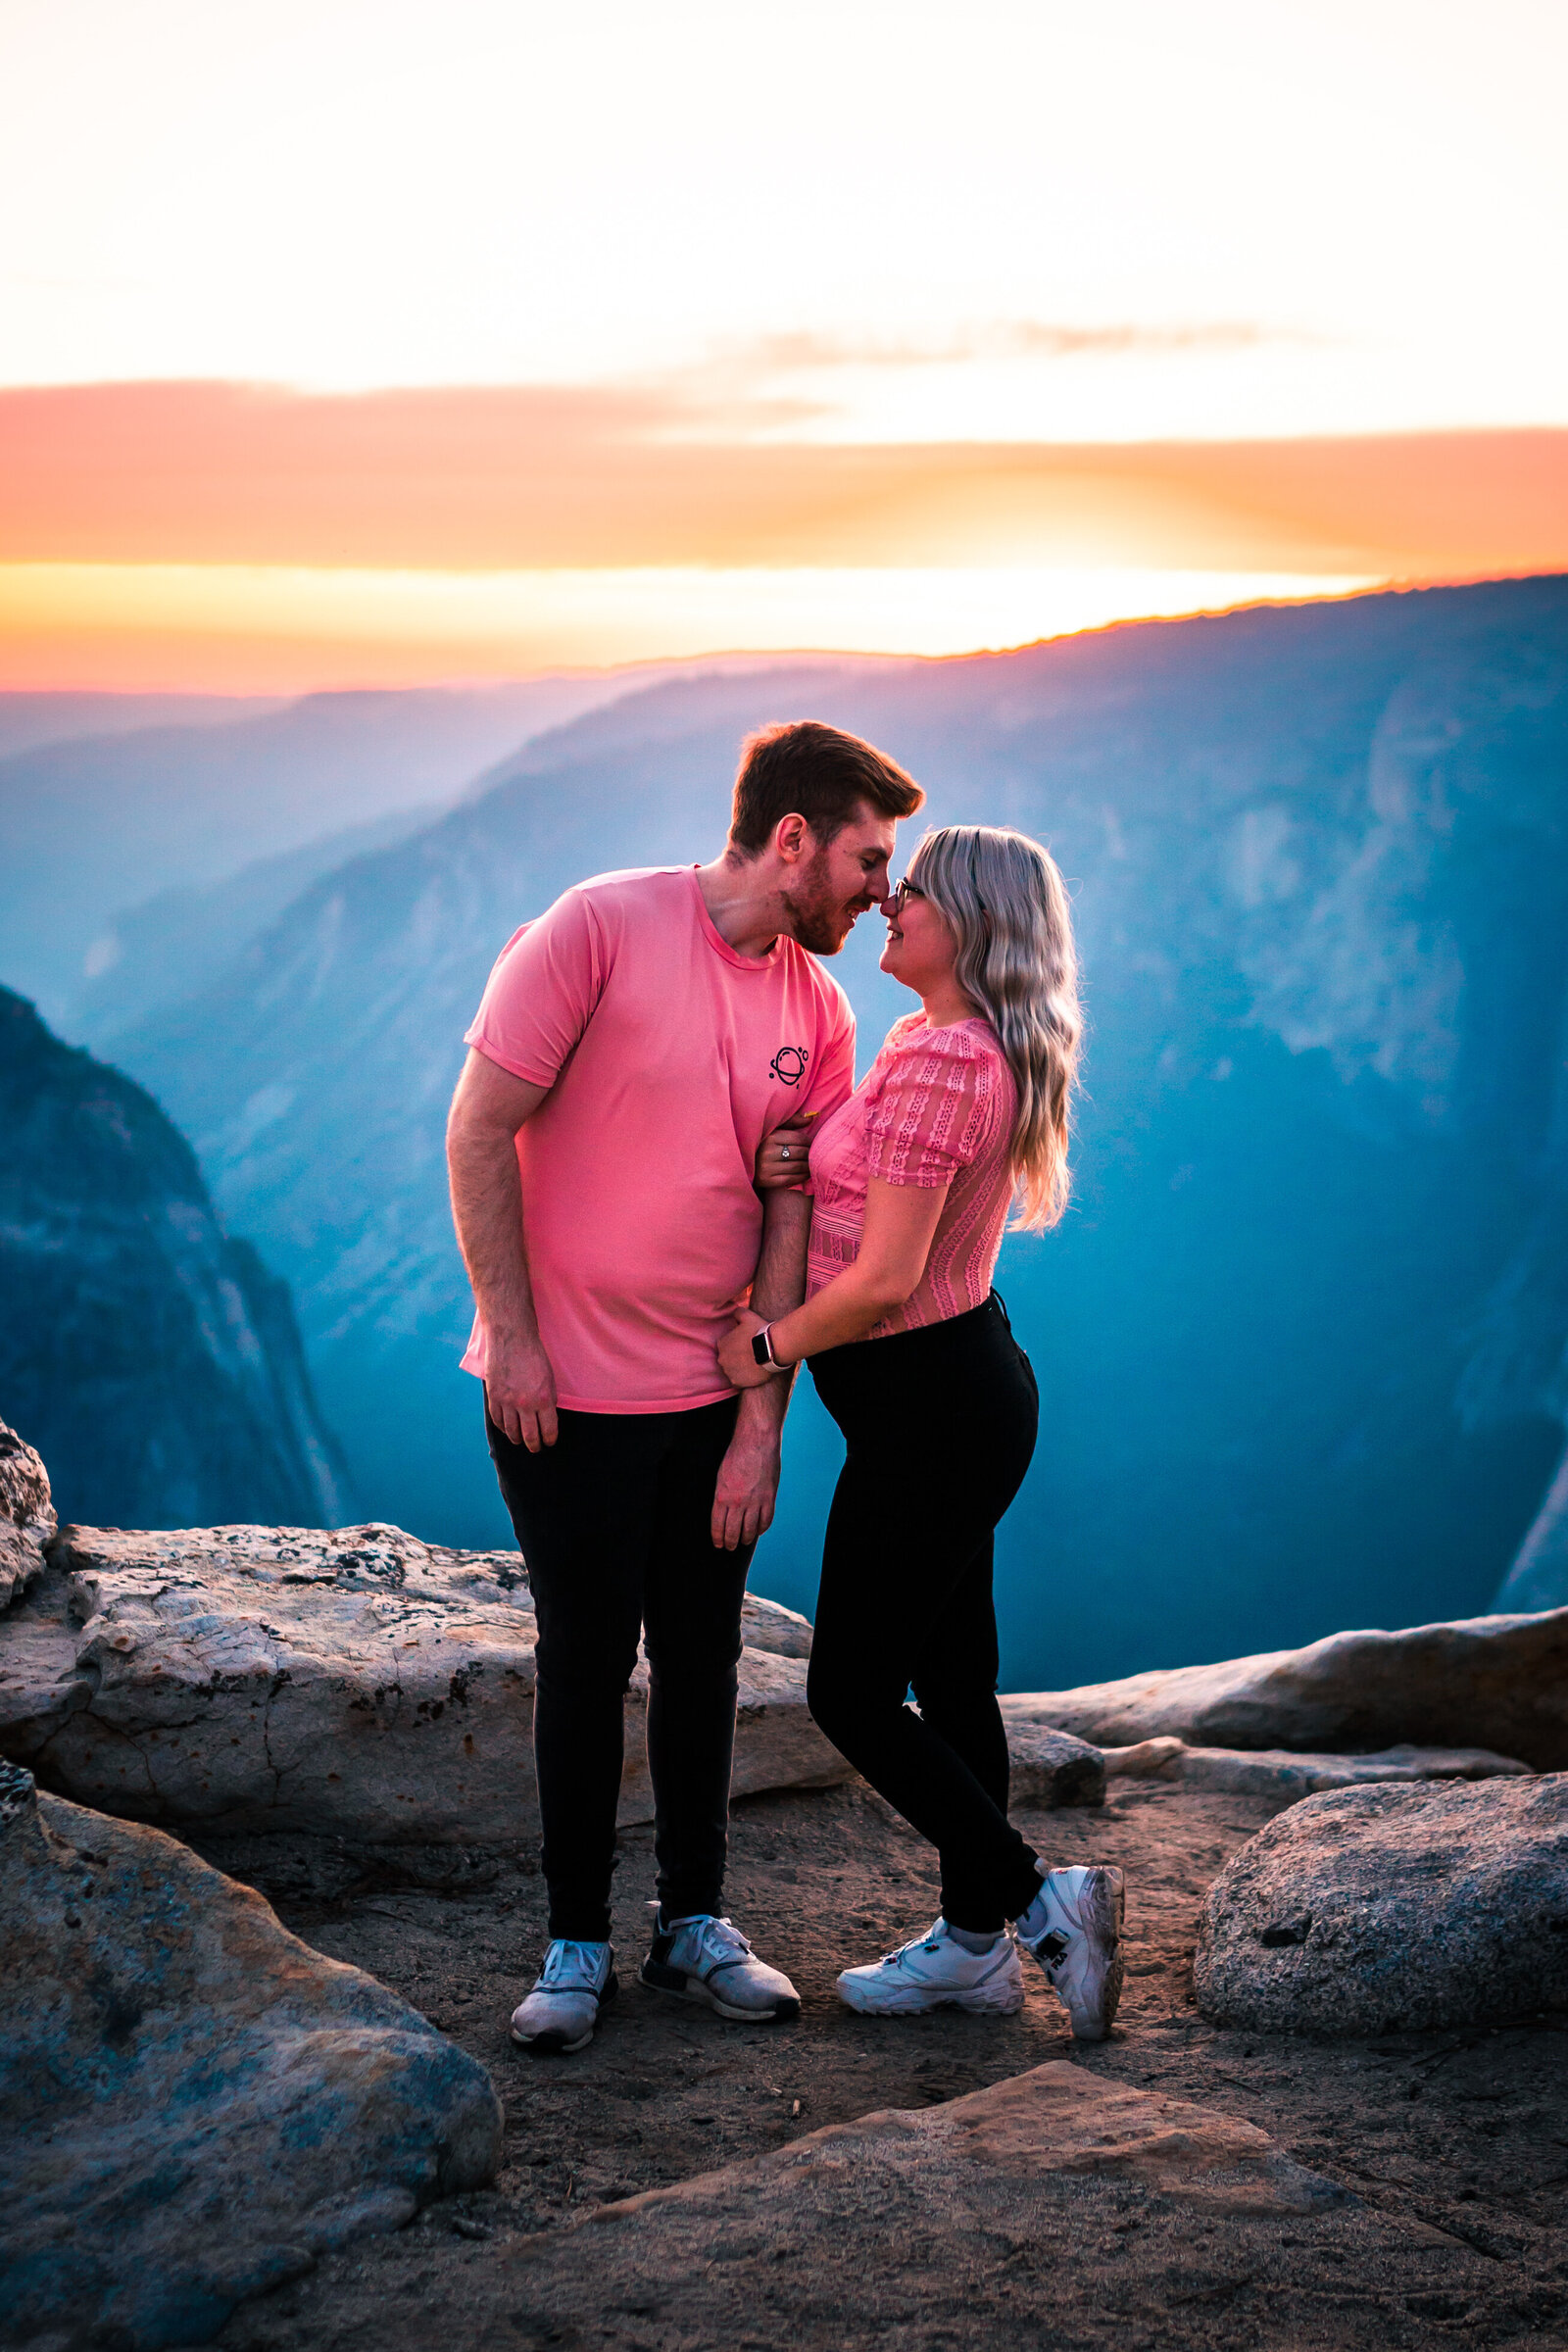 Couple wearing matching clothes, looking at each other with noses touching and smiling, with mountains and beautiful sunset in background.